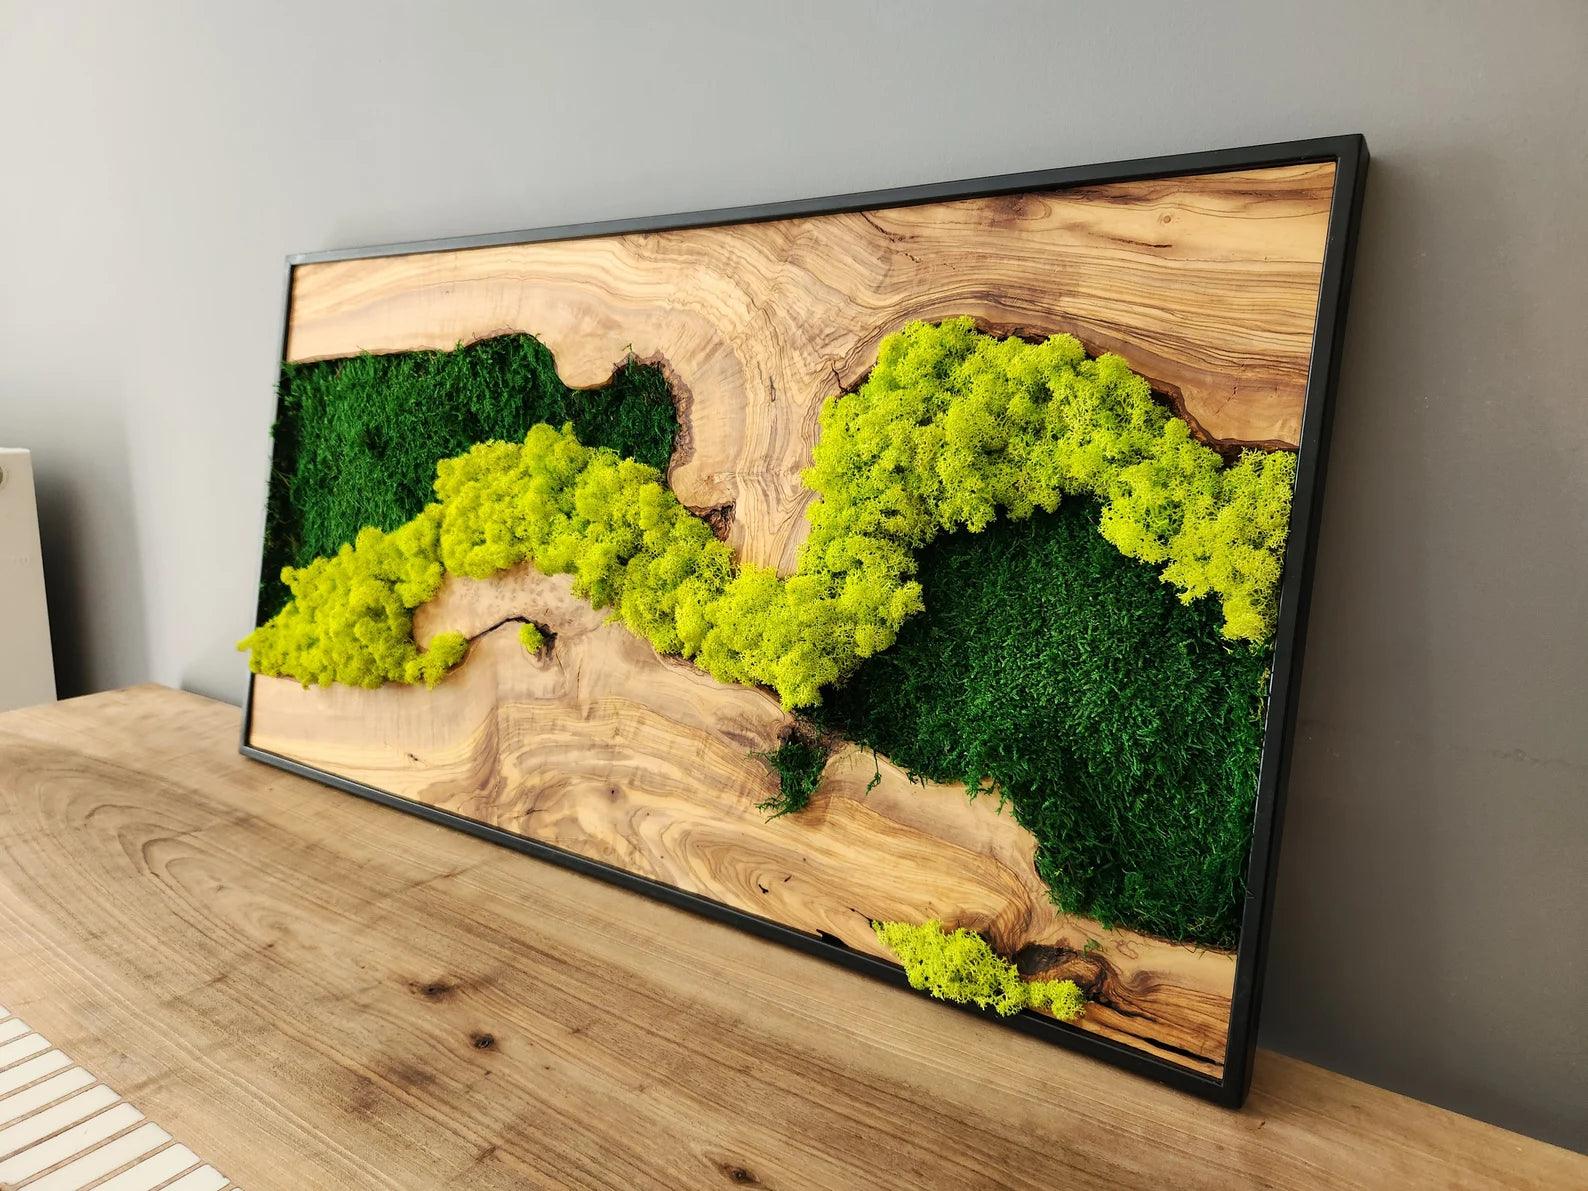 DIY Moss Wall Decor for Your Home